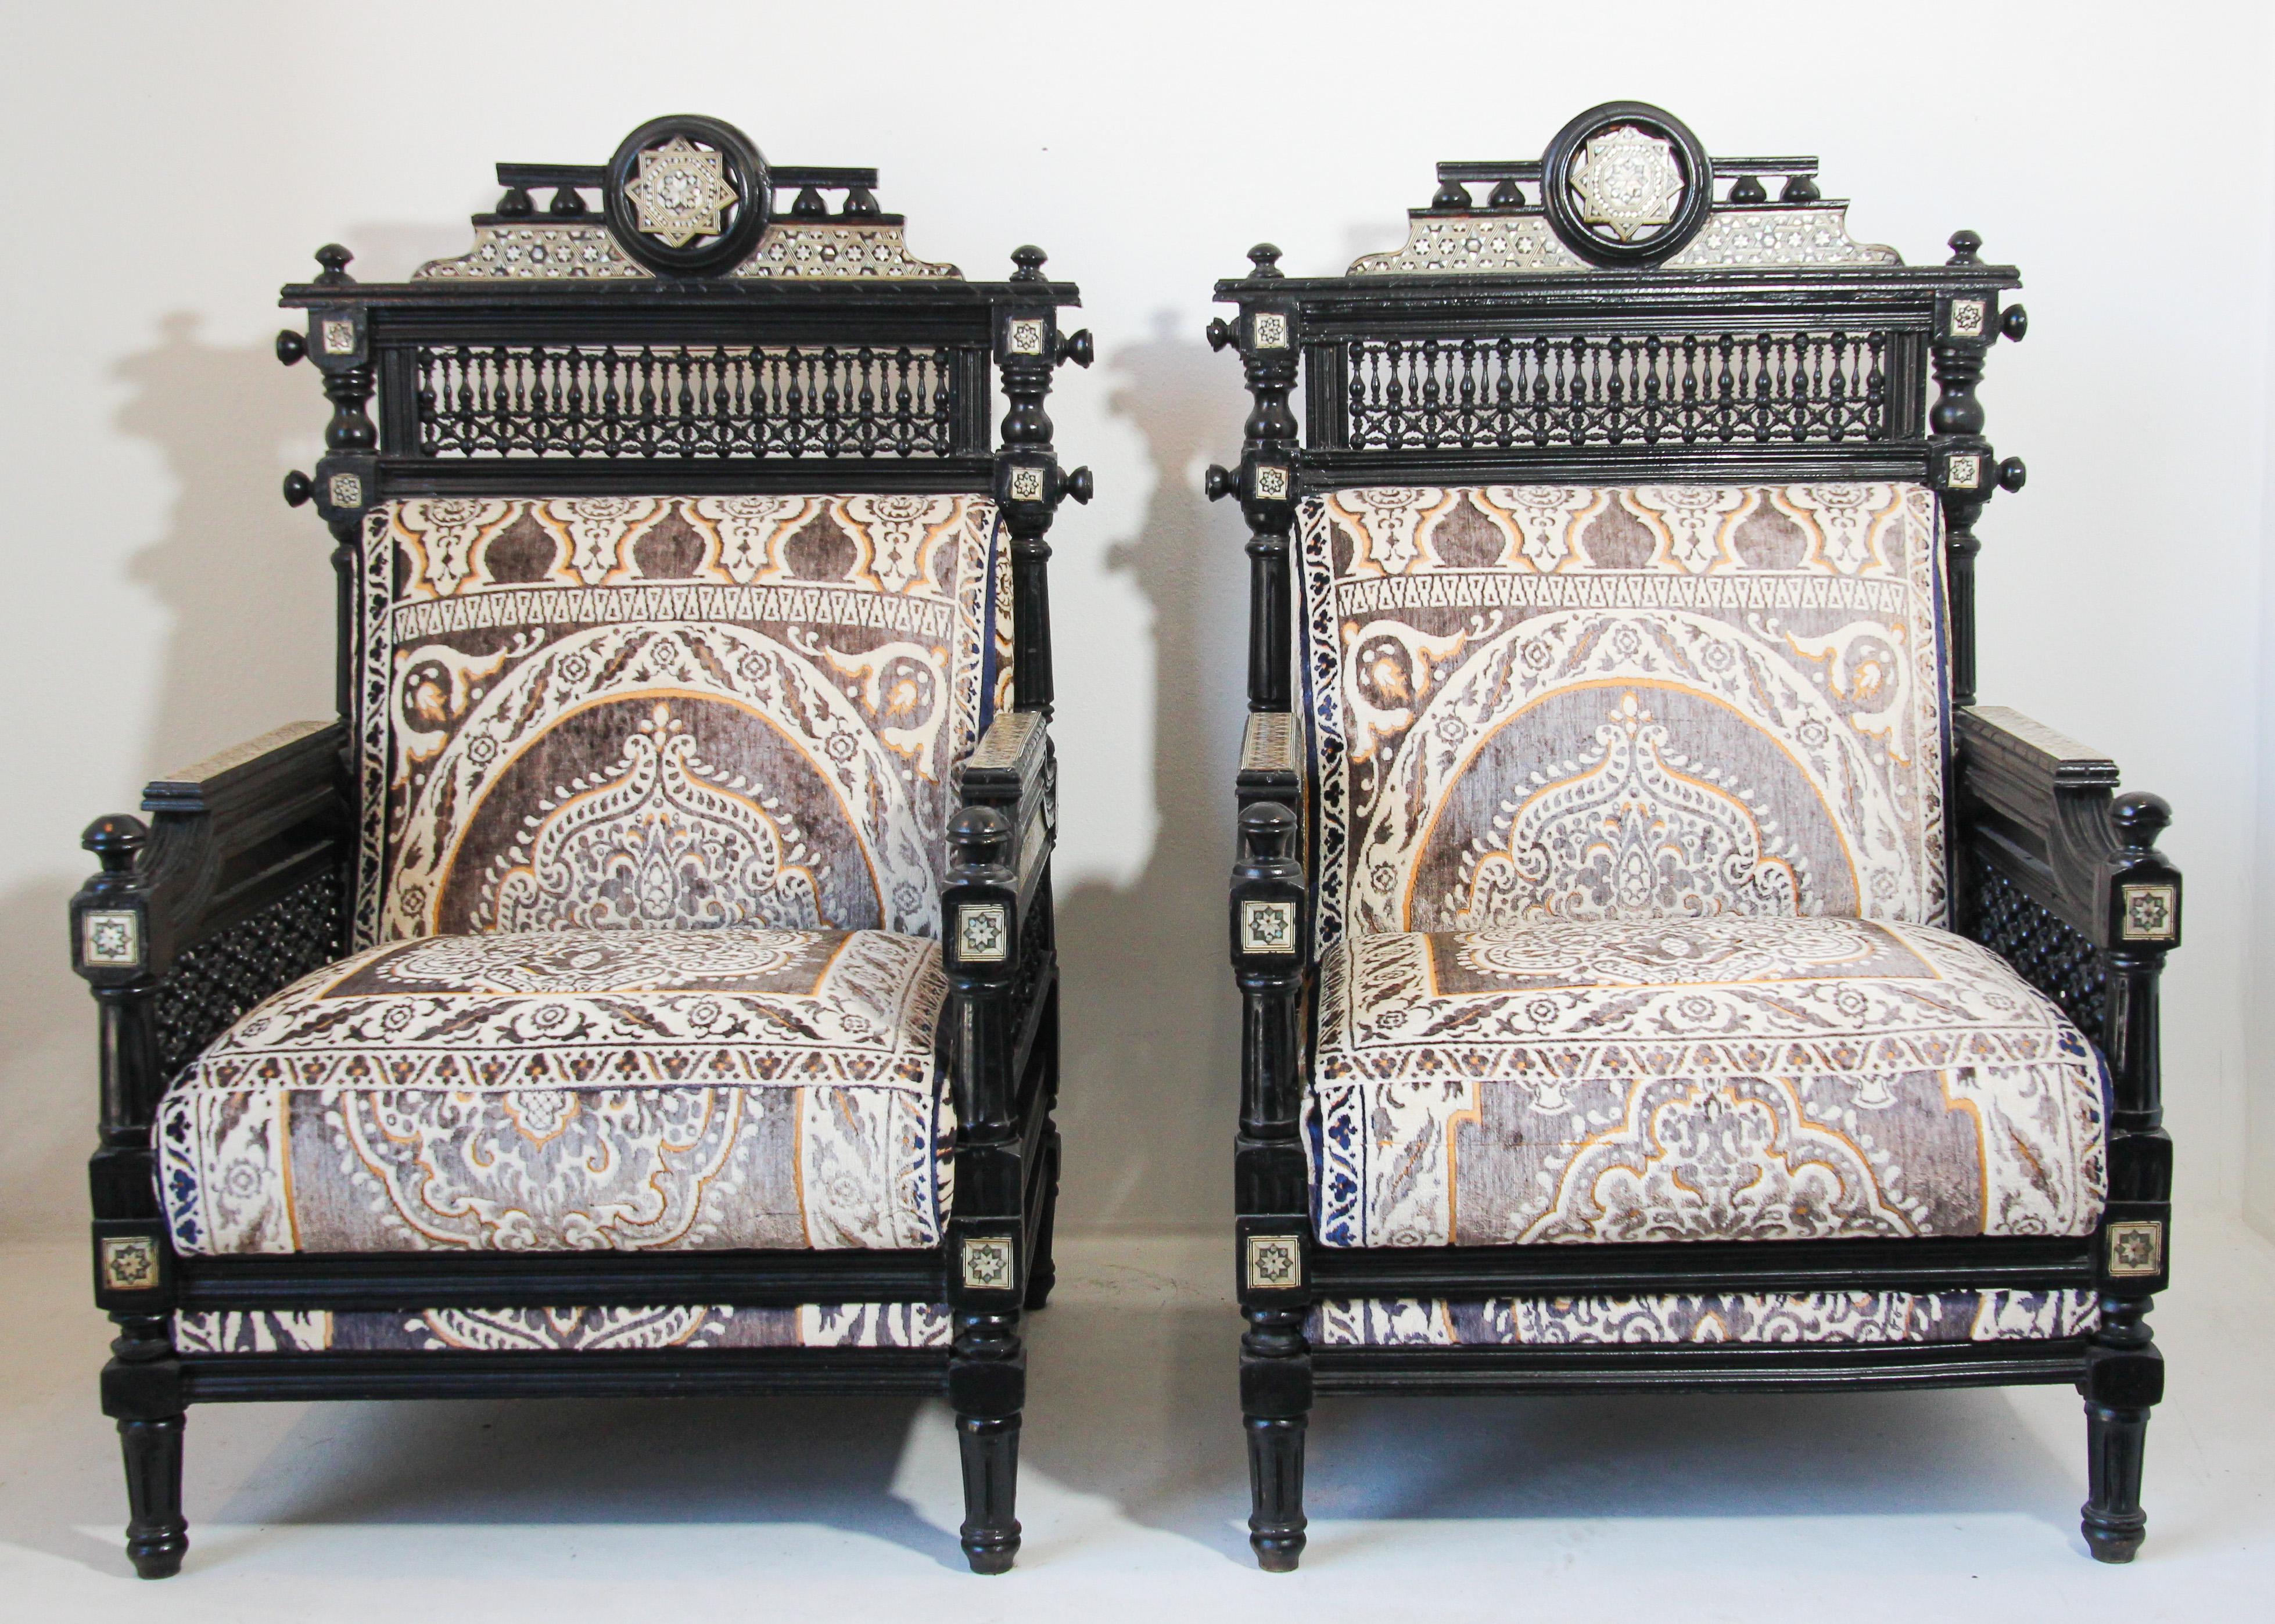 Antique Middle Eastern Moorish style black armchairs
Very rare elegant pair of large Middle Eastern, Egyptian revival armchairs, inlay with intricate Syrian mother-of-pearl shell.
Black color painted and newly reupholstered with Moroccan antique